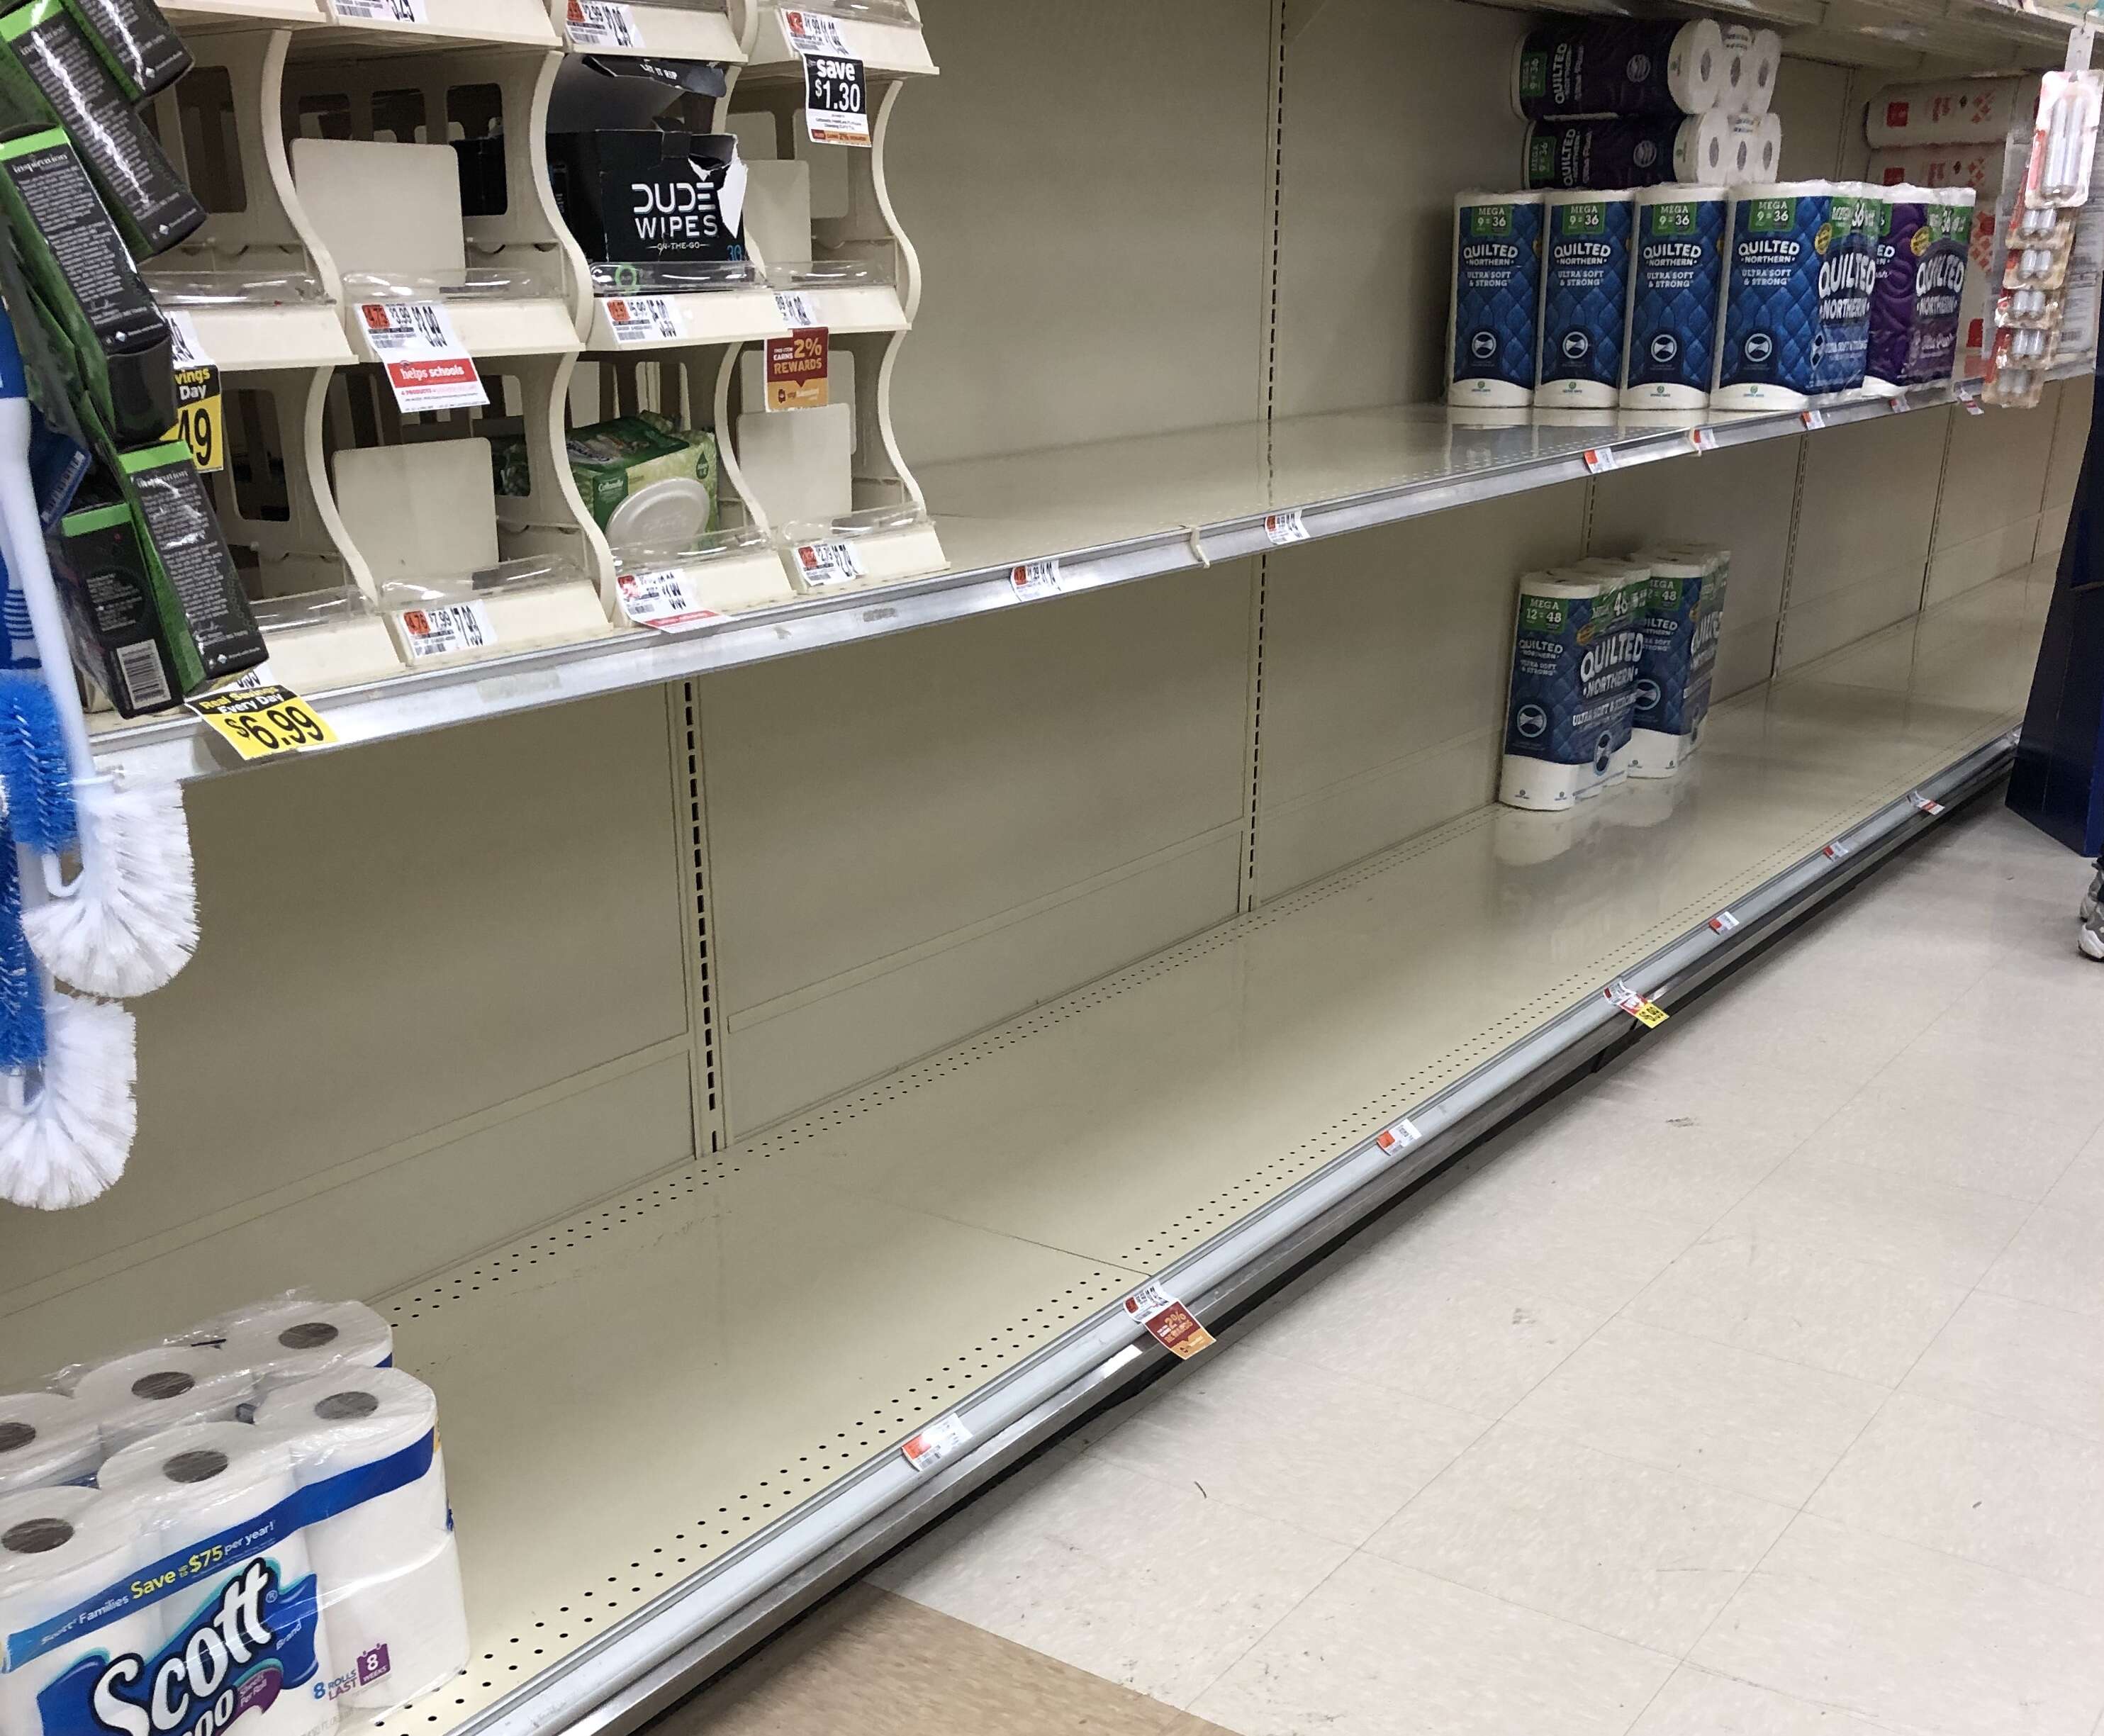 Bath tissue aisle (with lots of empty shelves) at Hannaford in Augusta